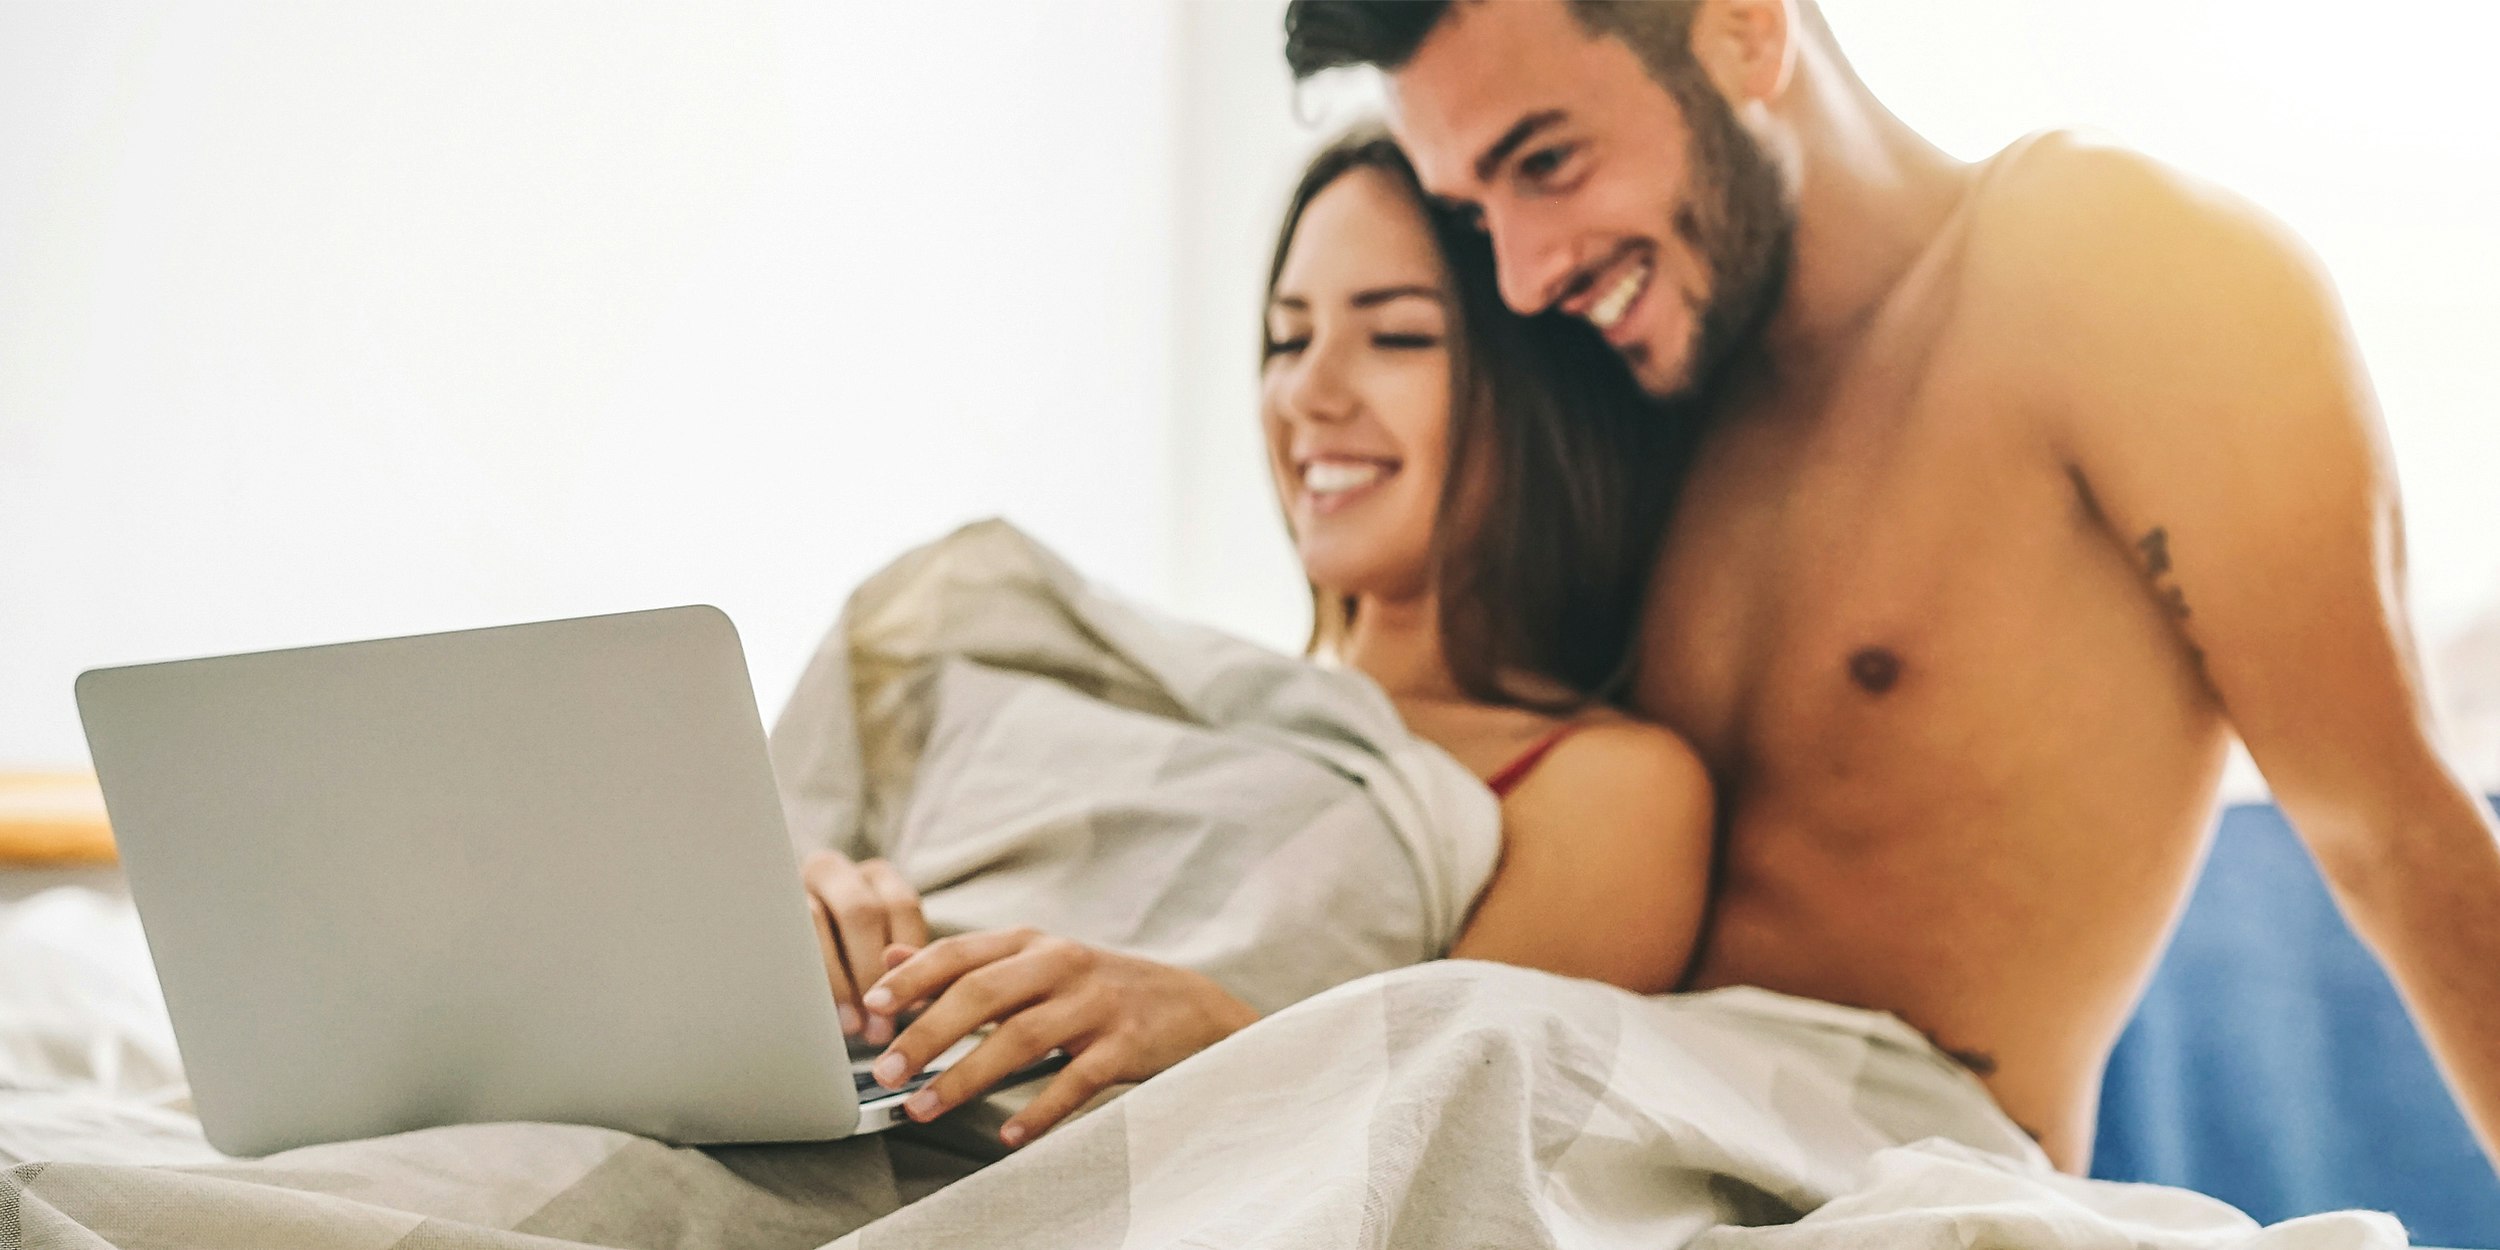 Porn For Couples To Watch